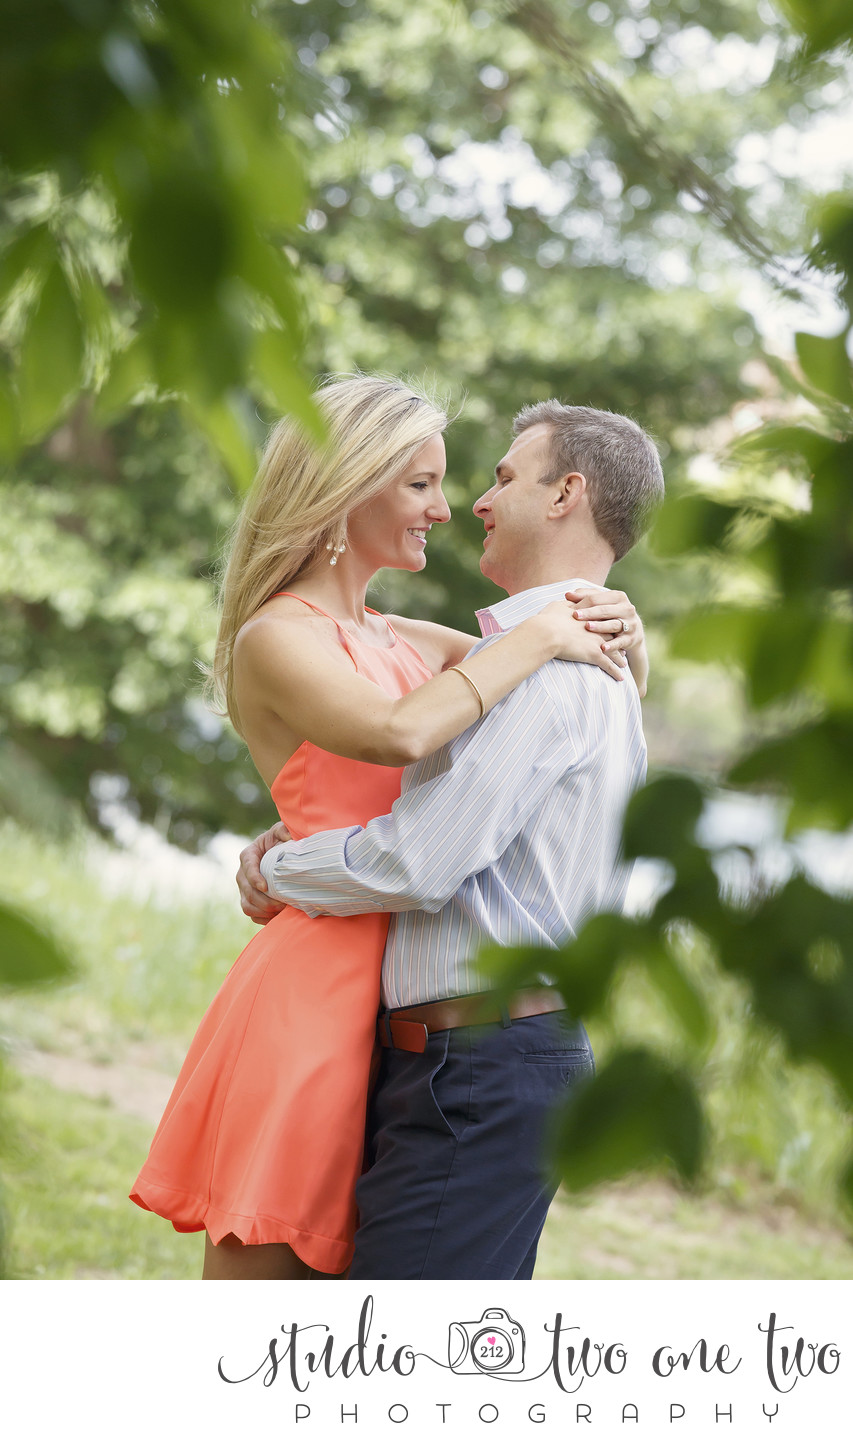 Candid wedding and engagement photography